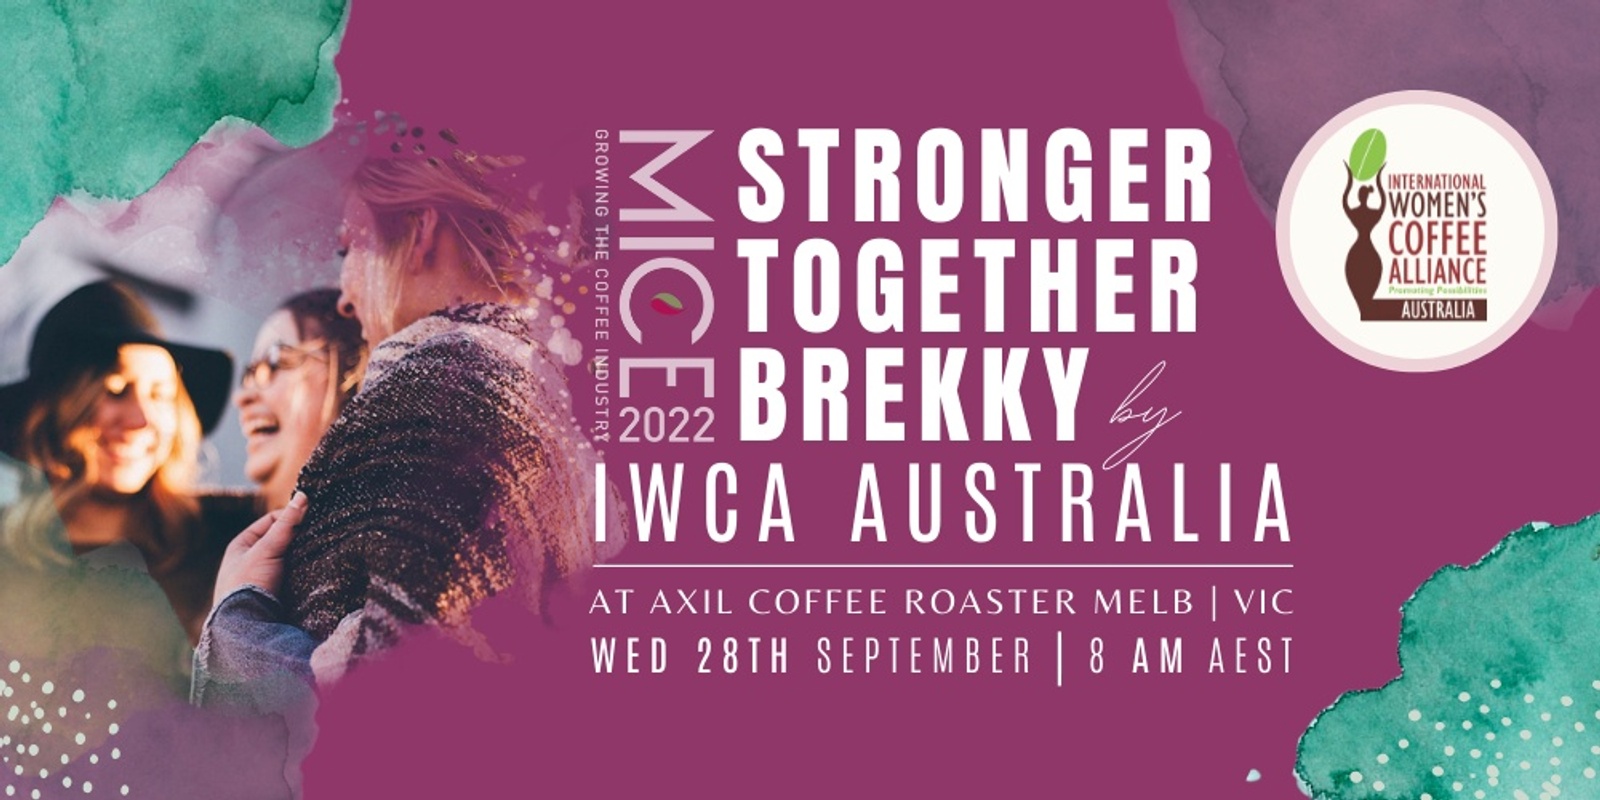 Banner image for Stronger Together Brekky by IWCA Australia